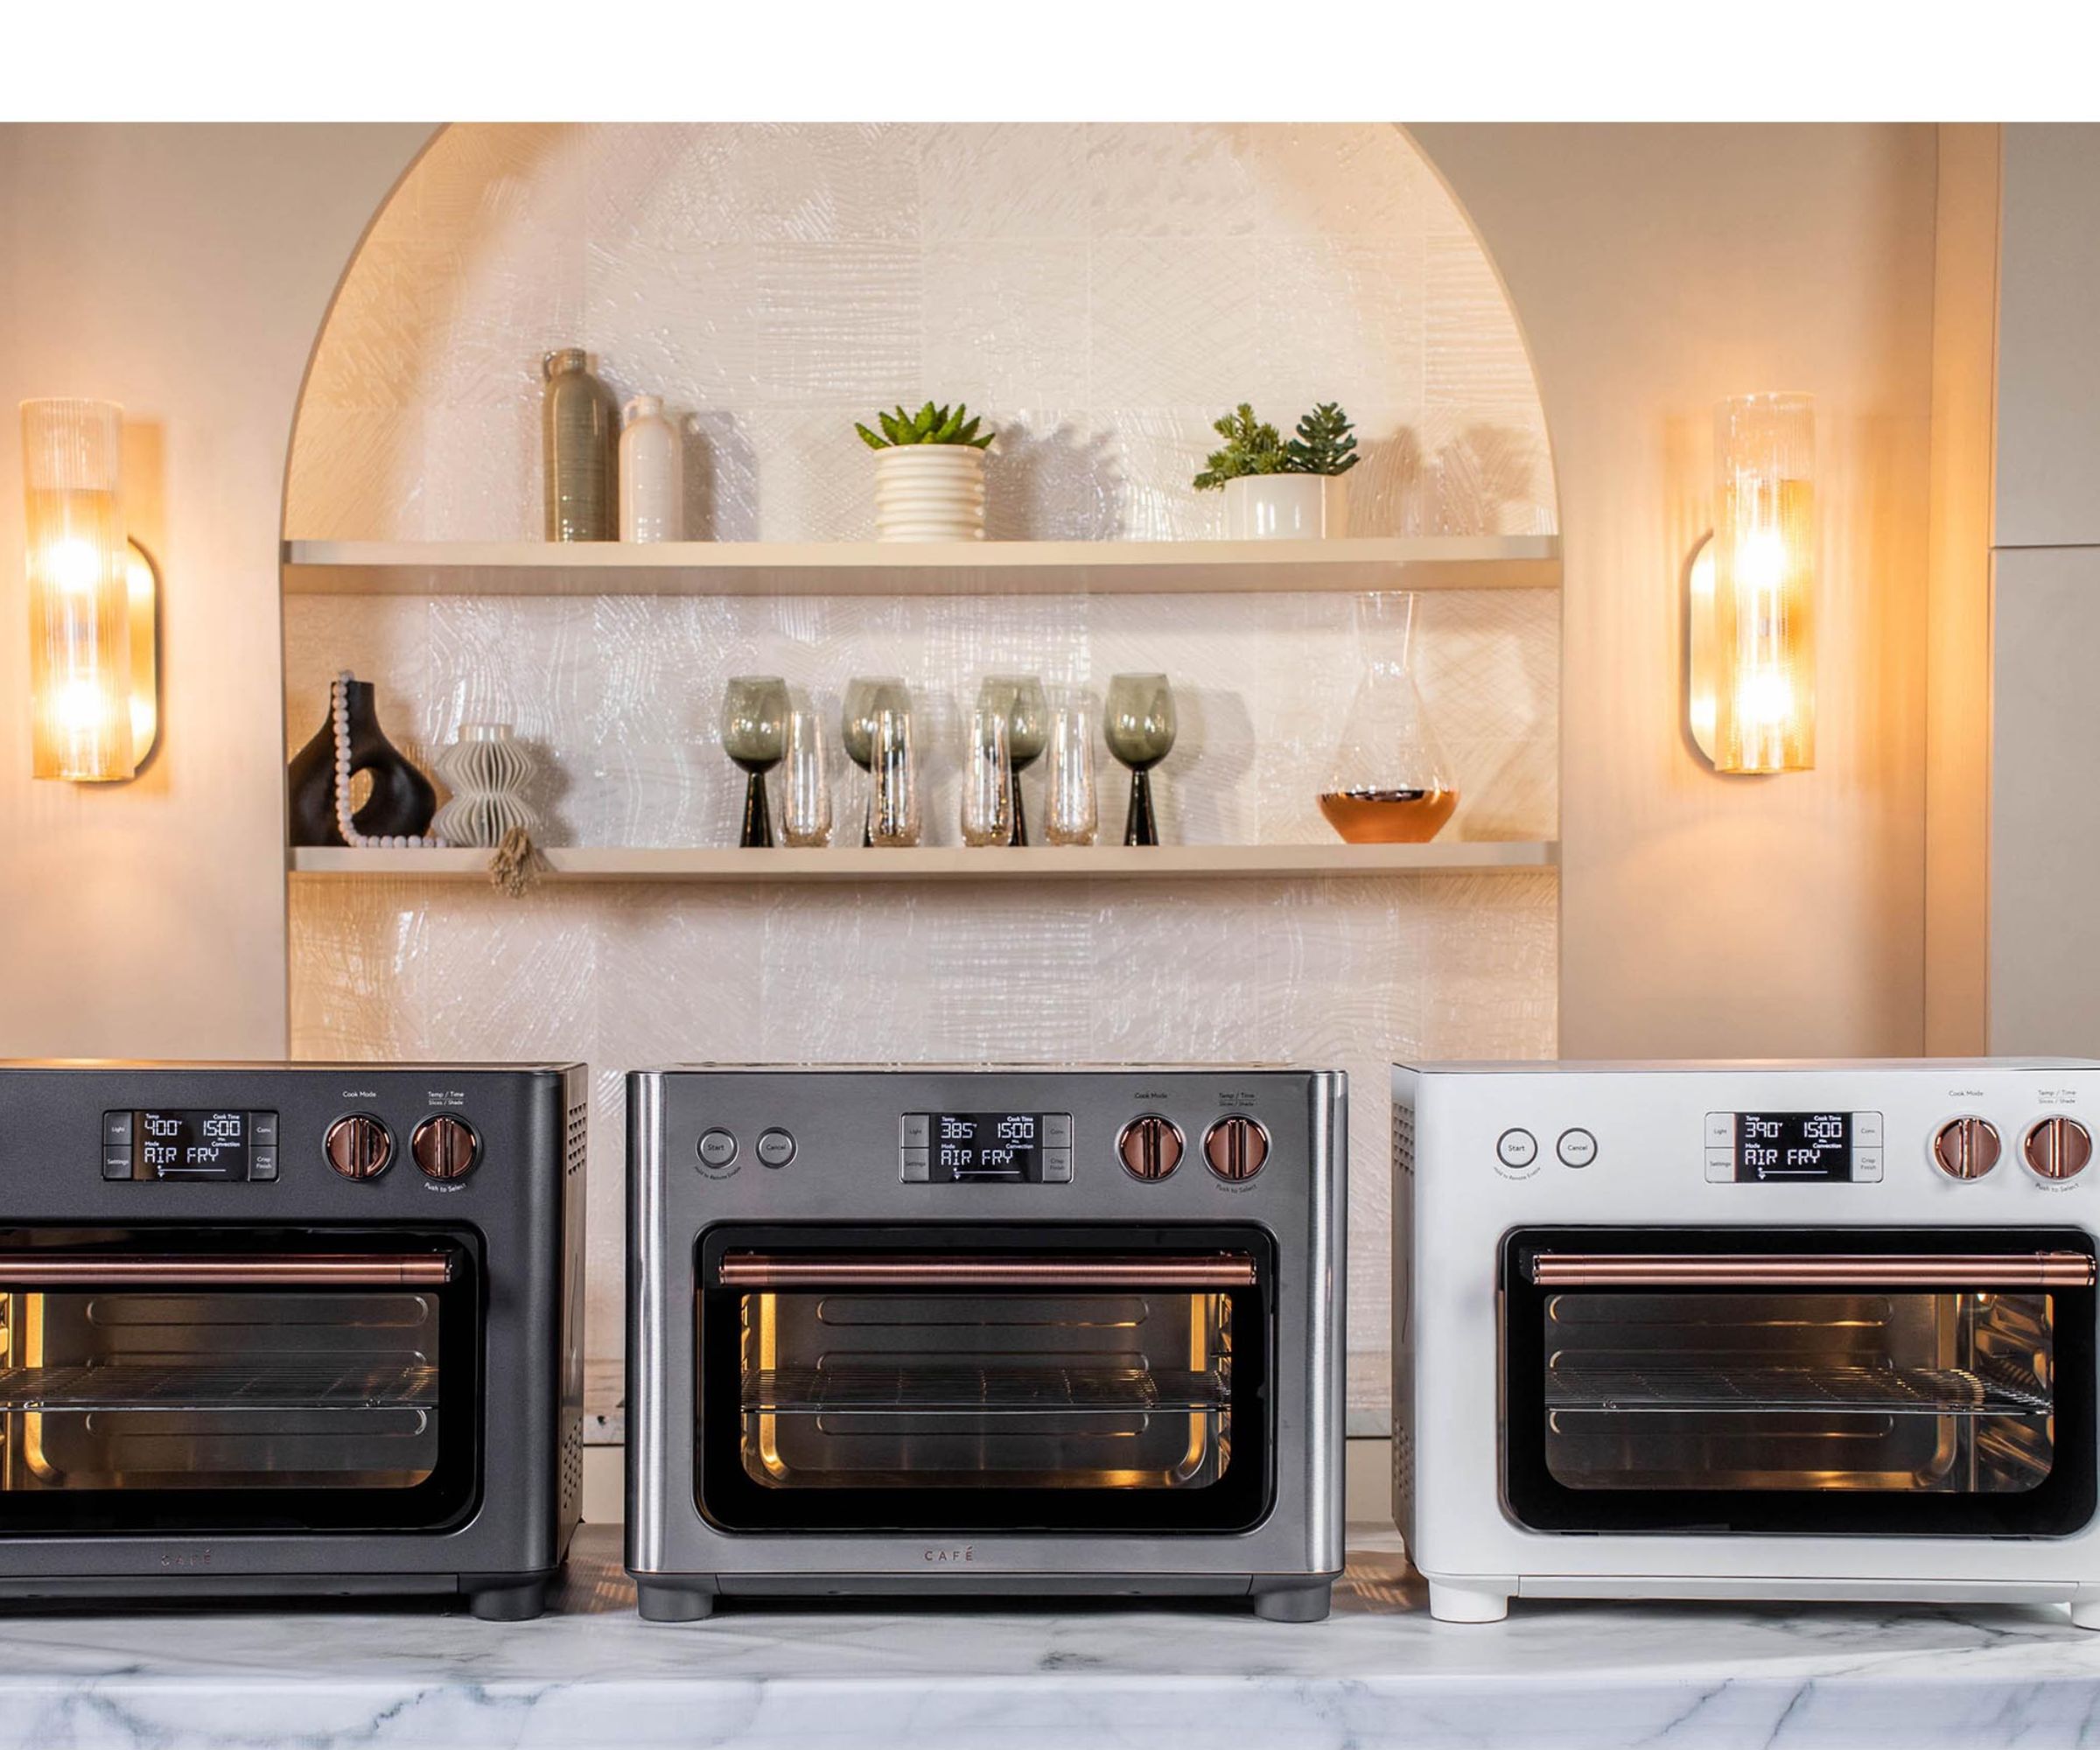 Three Café Courture ovens on the countertop